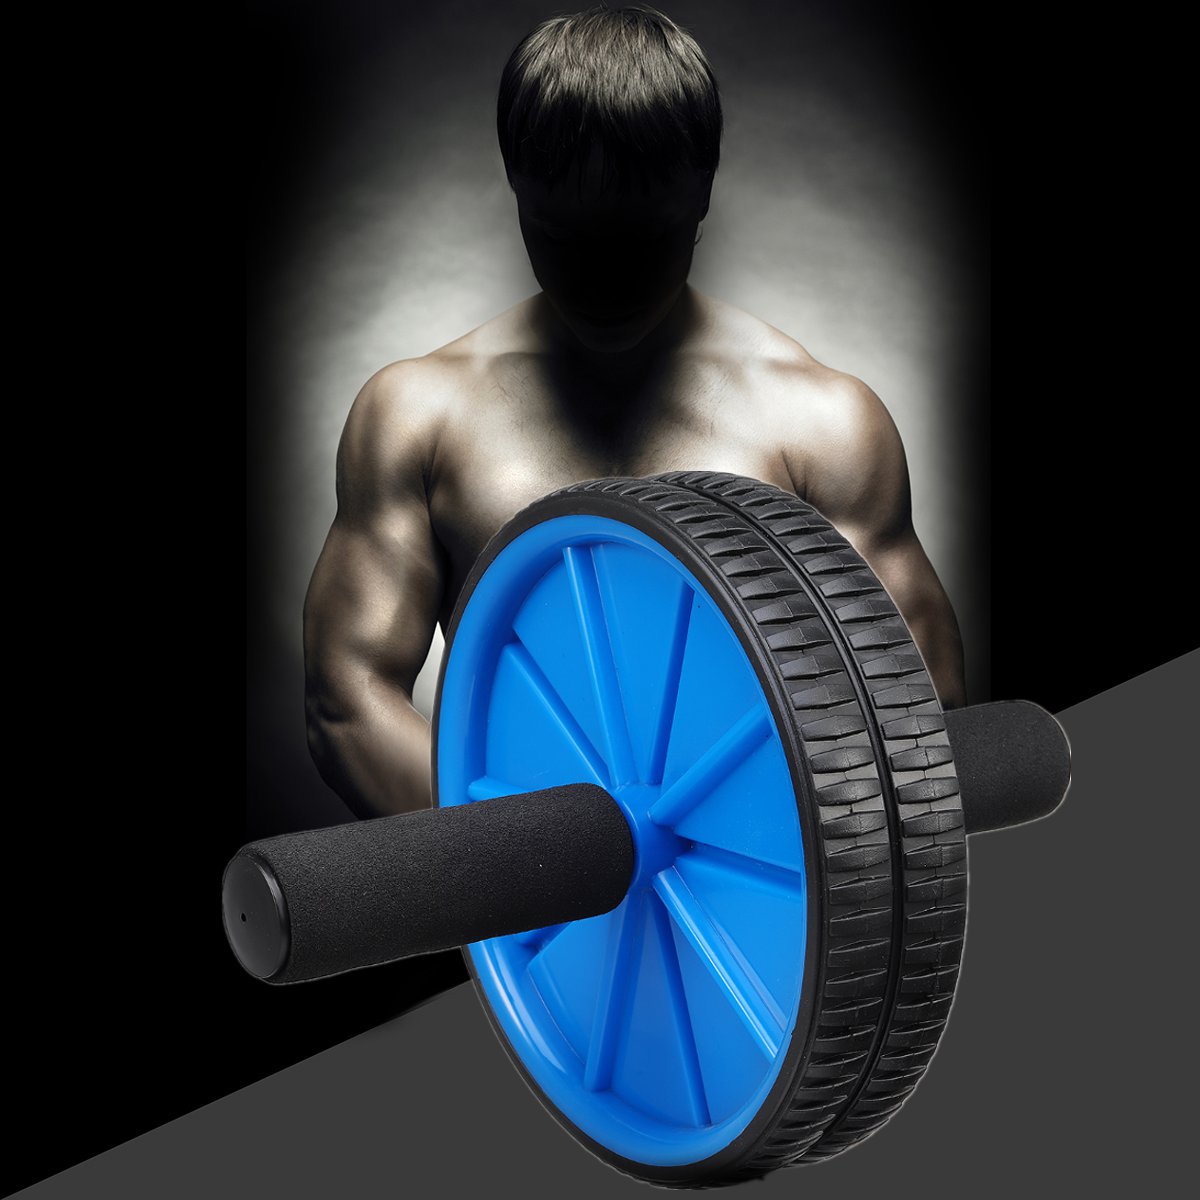 Body-Fitness-Dual-Wheel-Abdominal-Training-roller-Home-Gym-Arm-Waist-Exerciser-Gym-Exercise-Tools-1464492